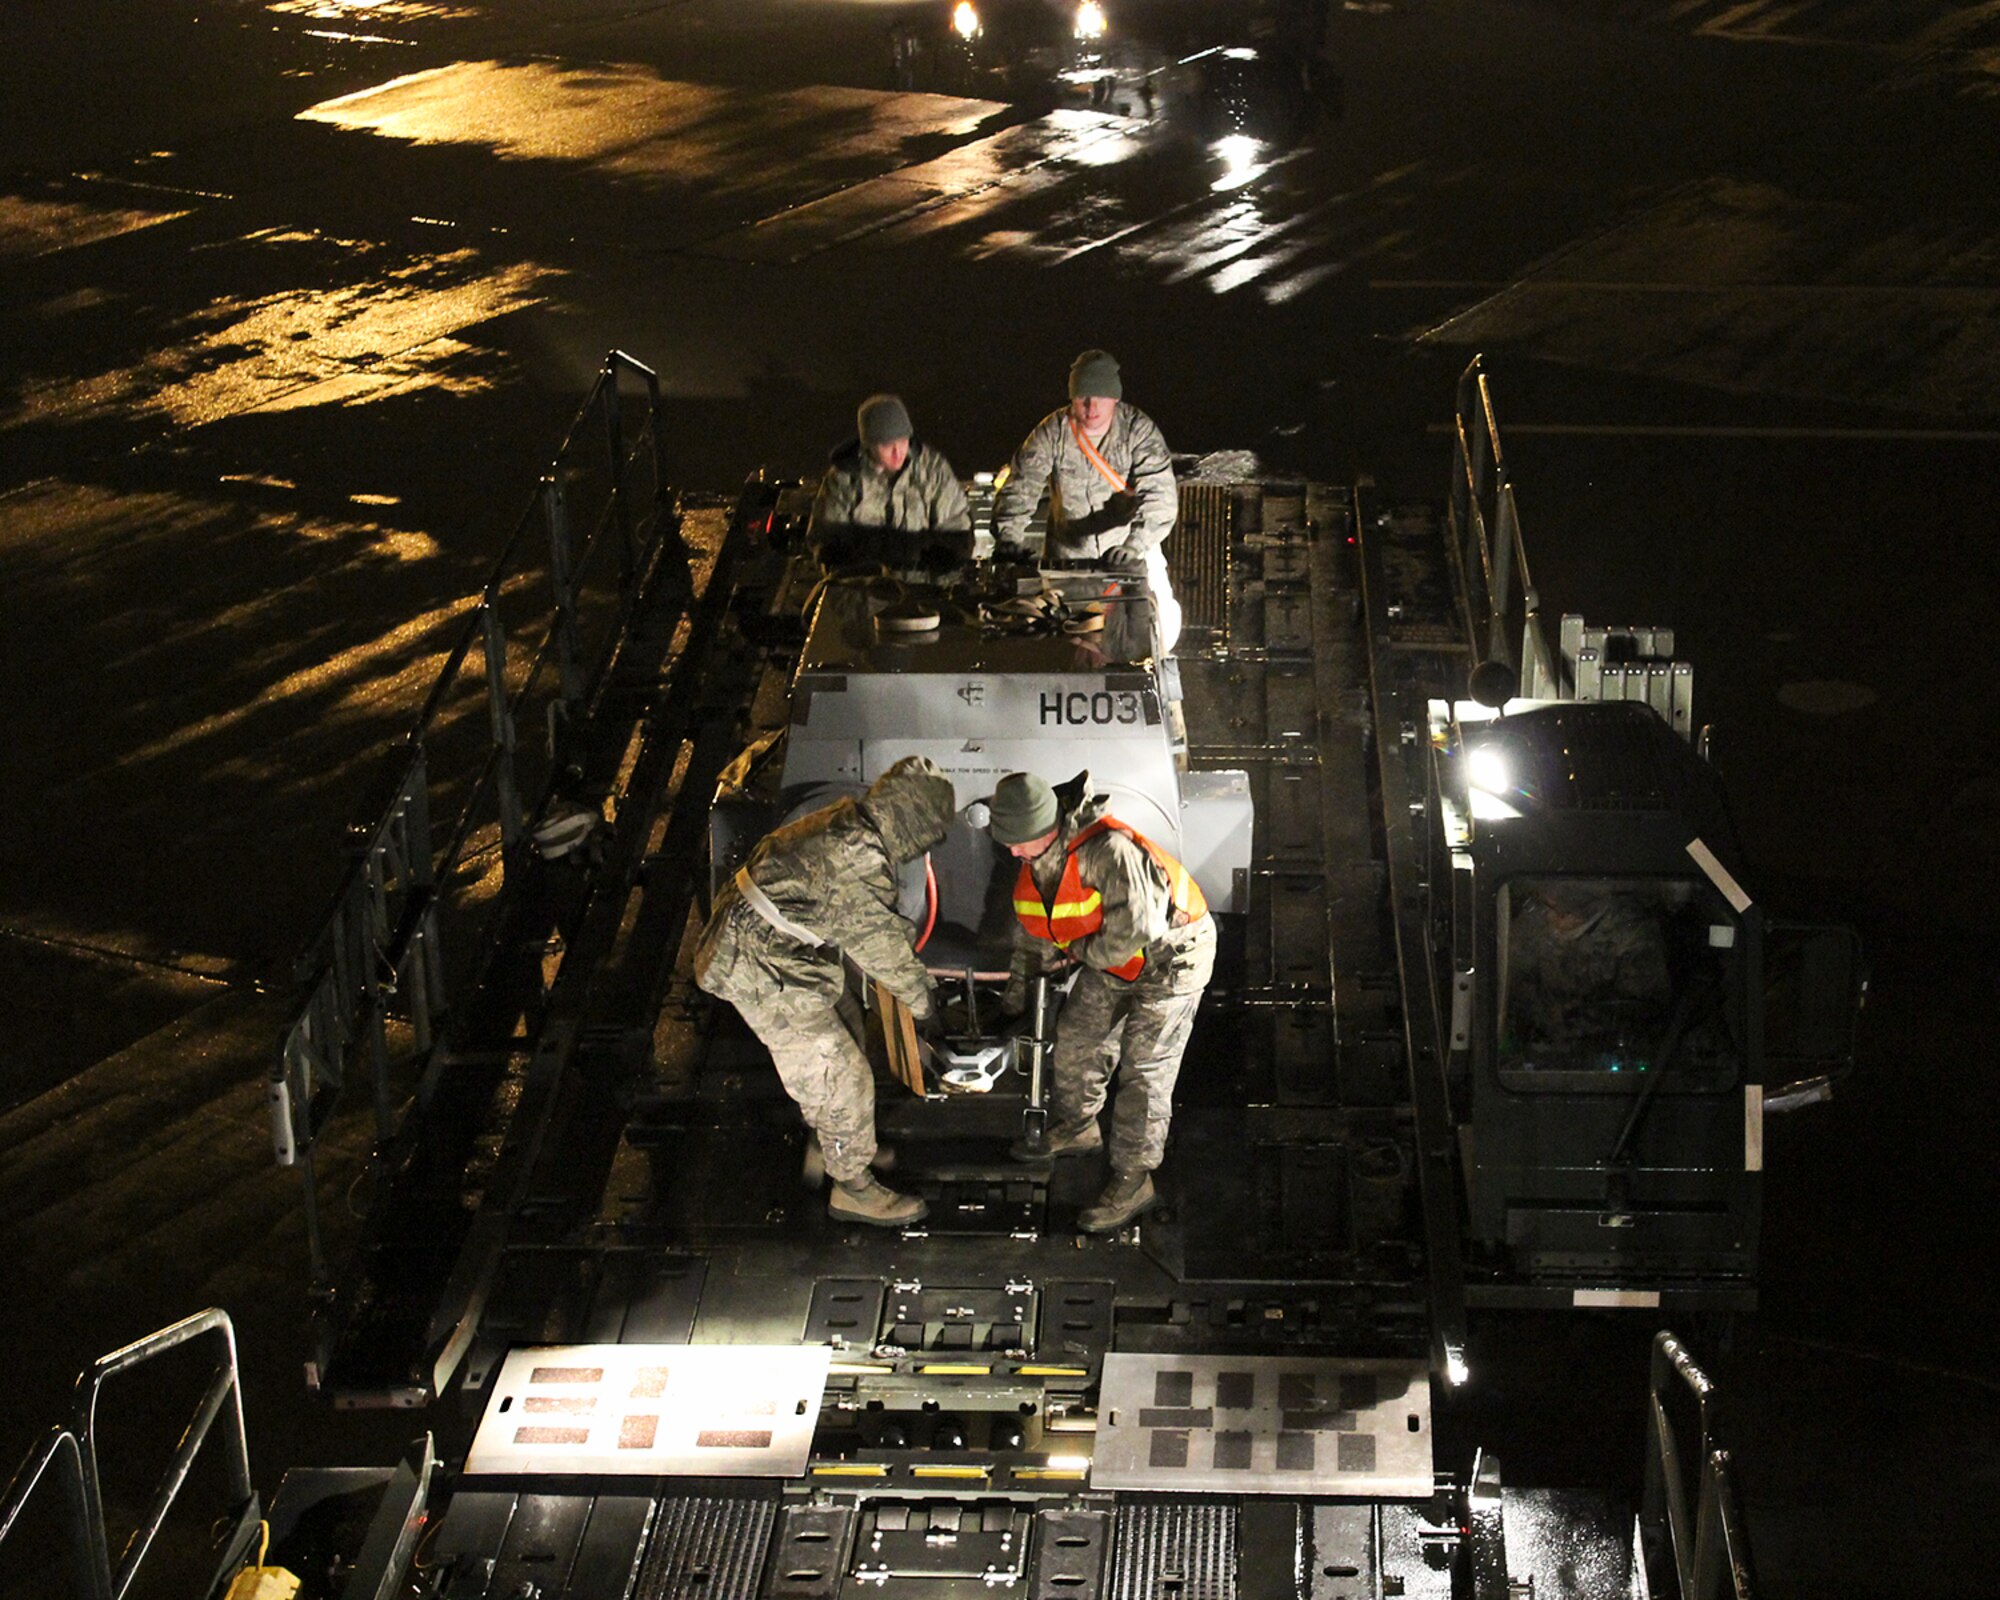 150408-Z-VA676-025 -- Airmen from the 127th Logistics Readiness Squadron and supporting units, prepare and load cargo to support a major deployment of personnel and aircraft from the 127th Wing at Selfridge Air National Guard Base, Mich. The deployment to the U.S. Central Command Area of Responsibility took place in early April 2015. Because of the flight schedules, much of the loading had to take place in the middle of the night. (U.S. Air National Guard photo by Tech. Sgt. Dan Heaton)